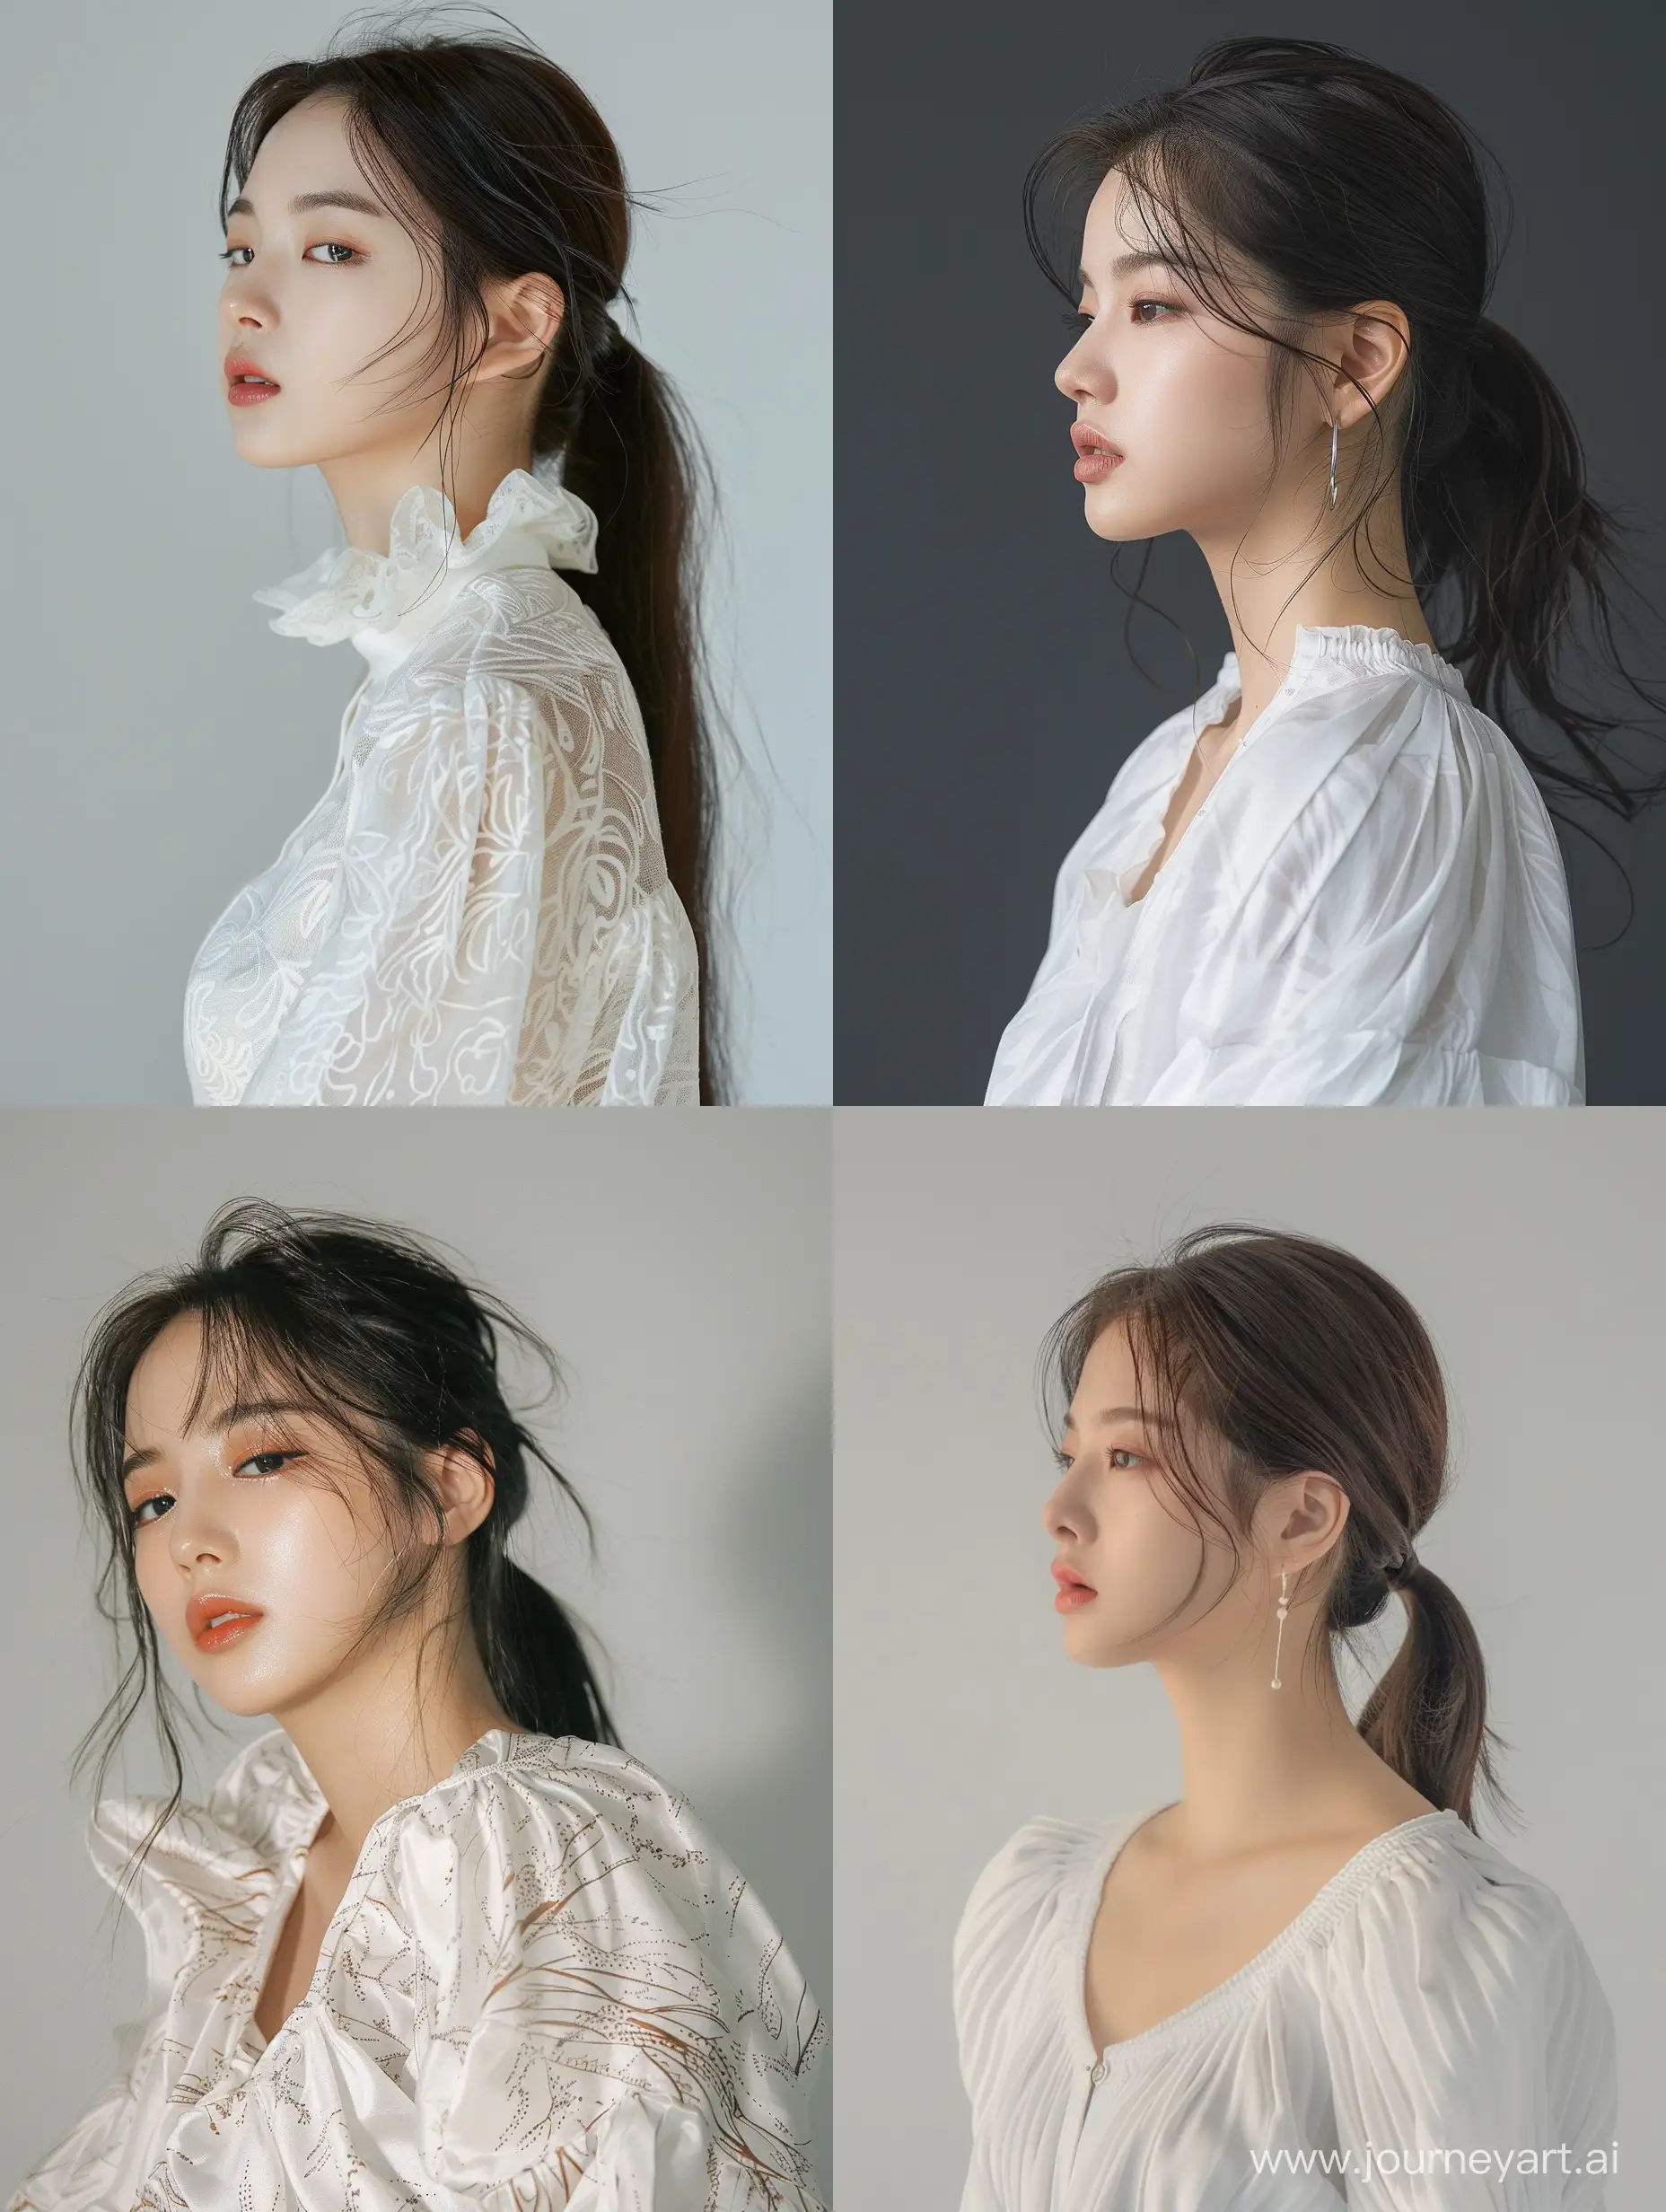 A beautiful Asian woman ,wearing white oversize motived blouse ,profile,a youthful appearance,head shot profile, and facial features resembling Blackpink's Jennie.  --v 6